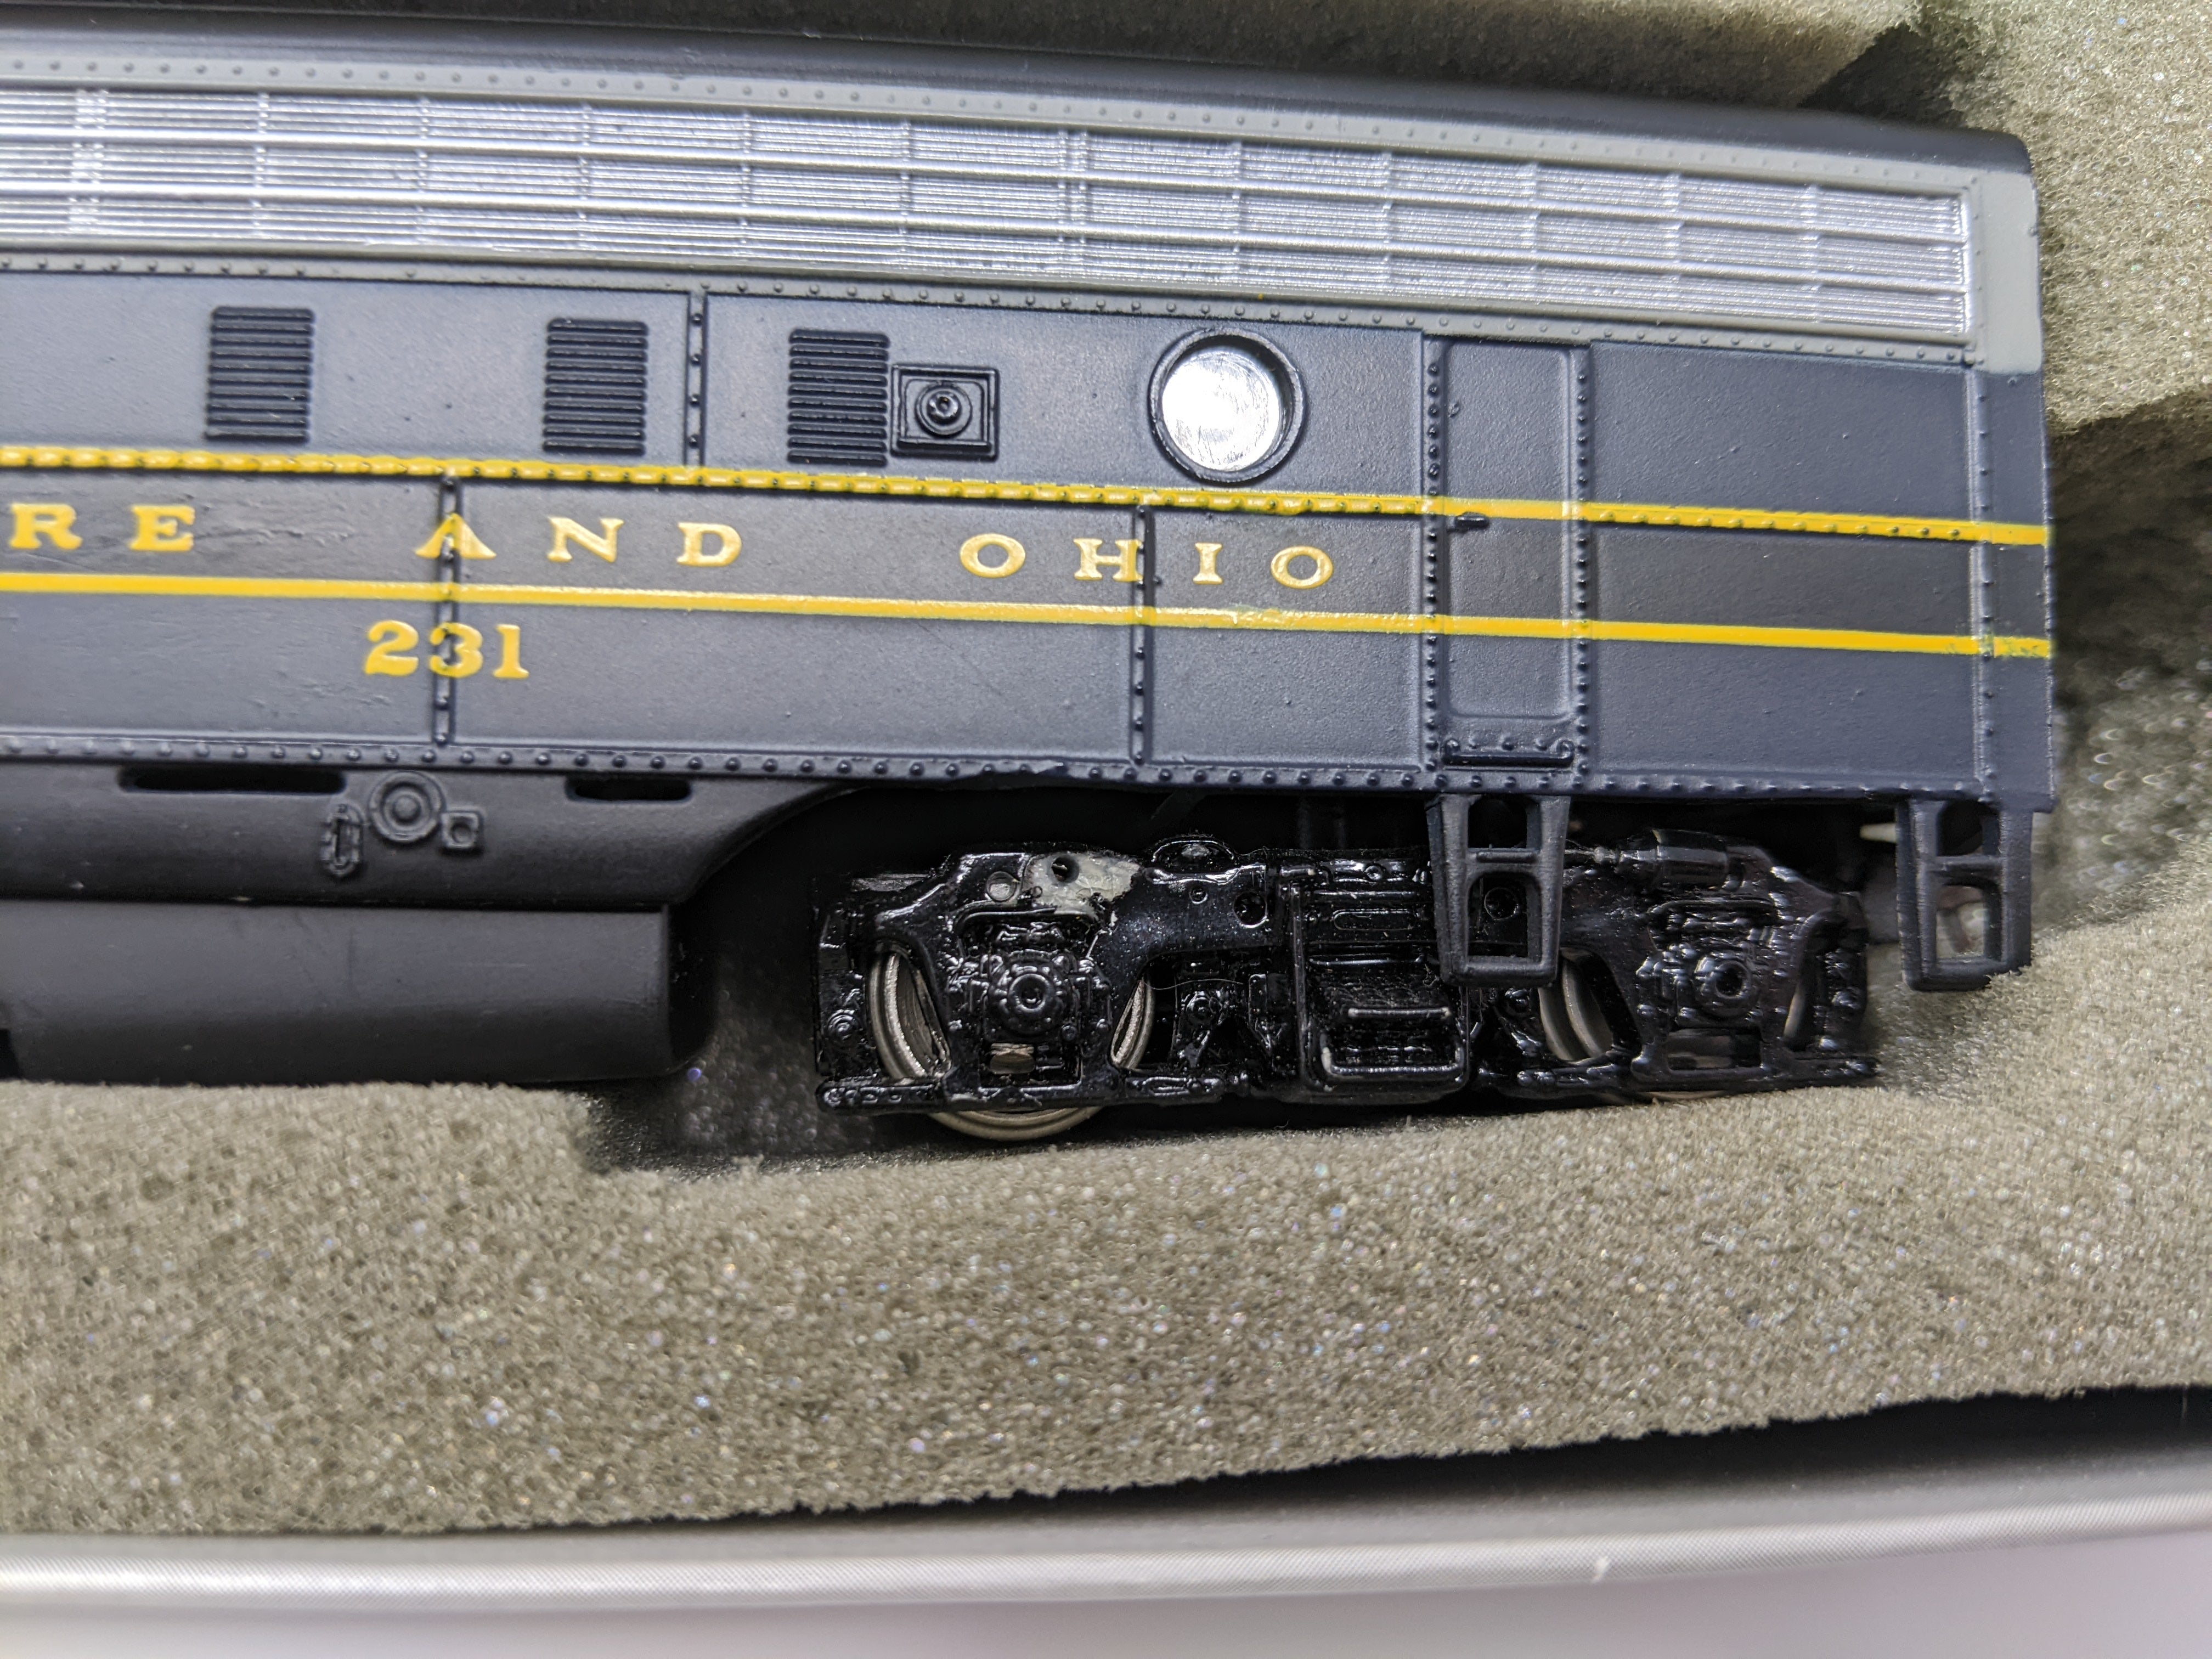 USED Bachmann 31211 HO Scale, EMD F7A Diesel Locomotive, Baltimore and Ohio #231 (DC)